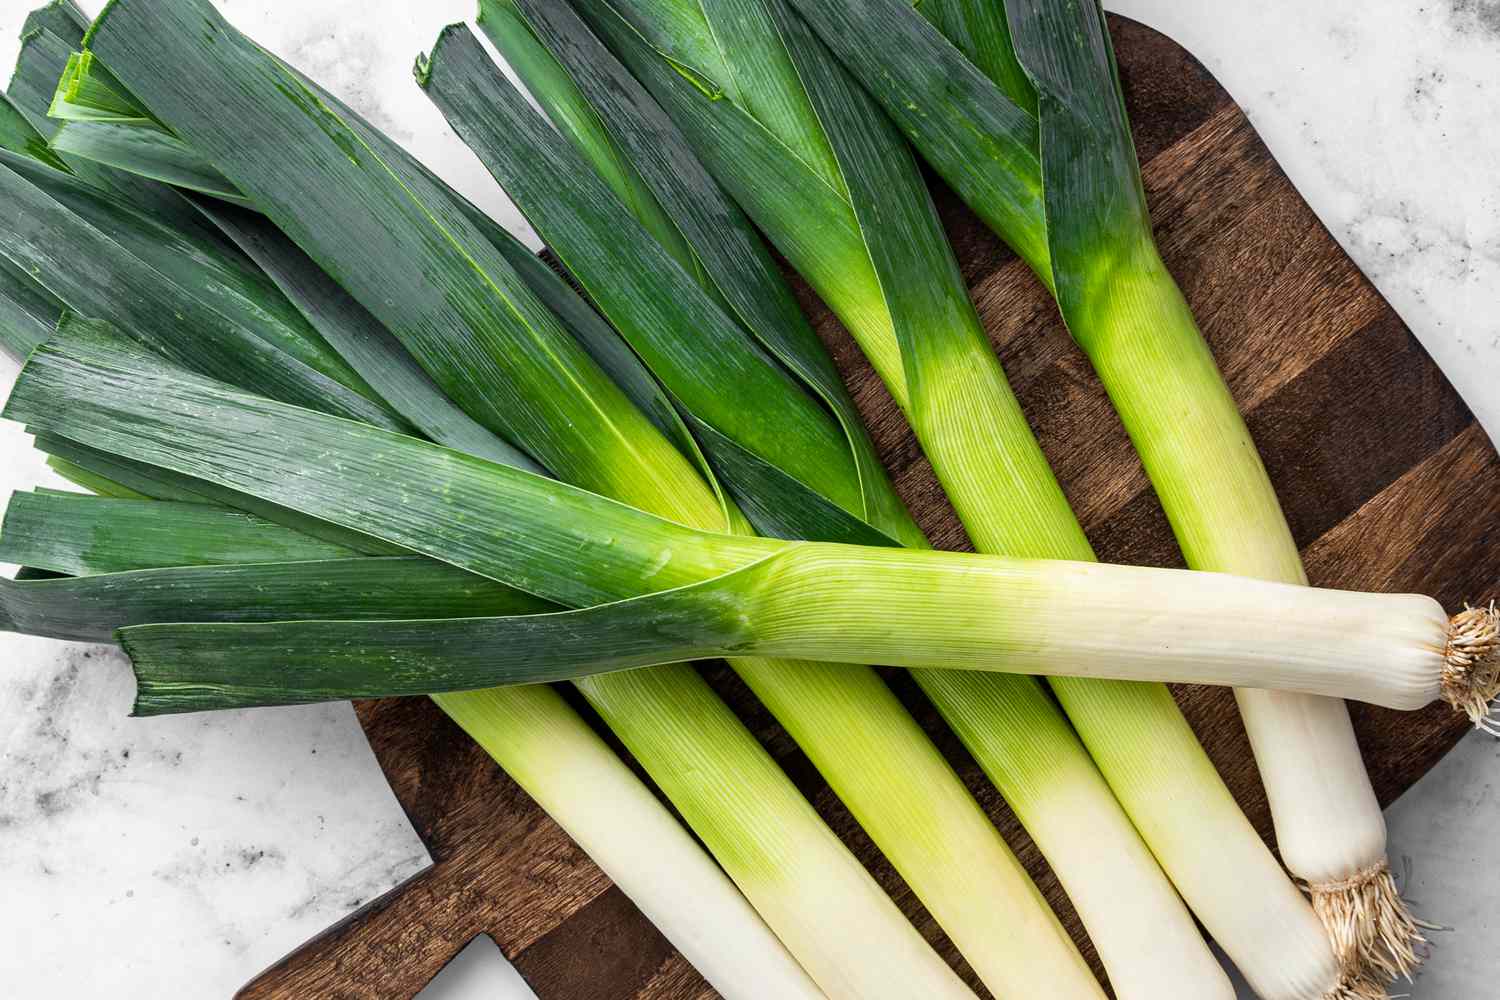 How To Store Leeks At Home